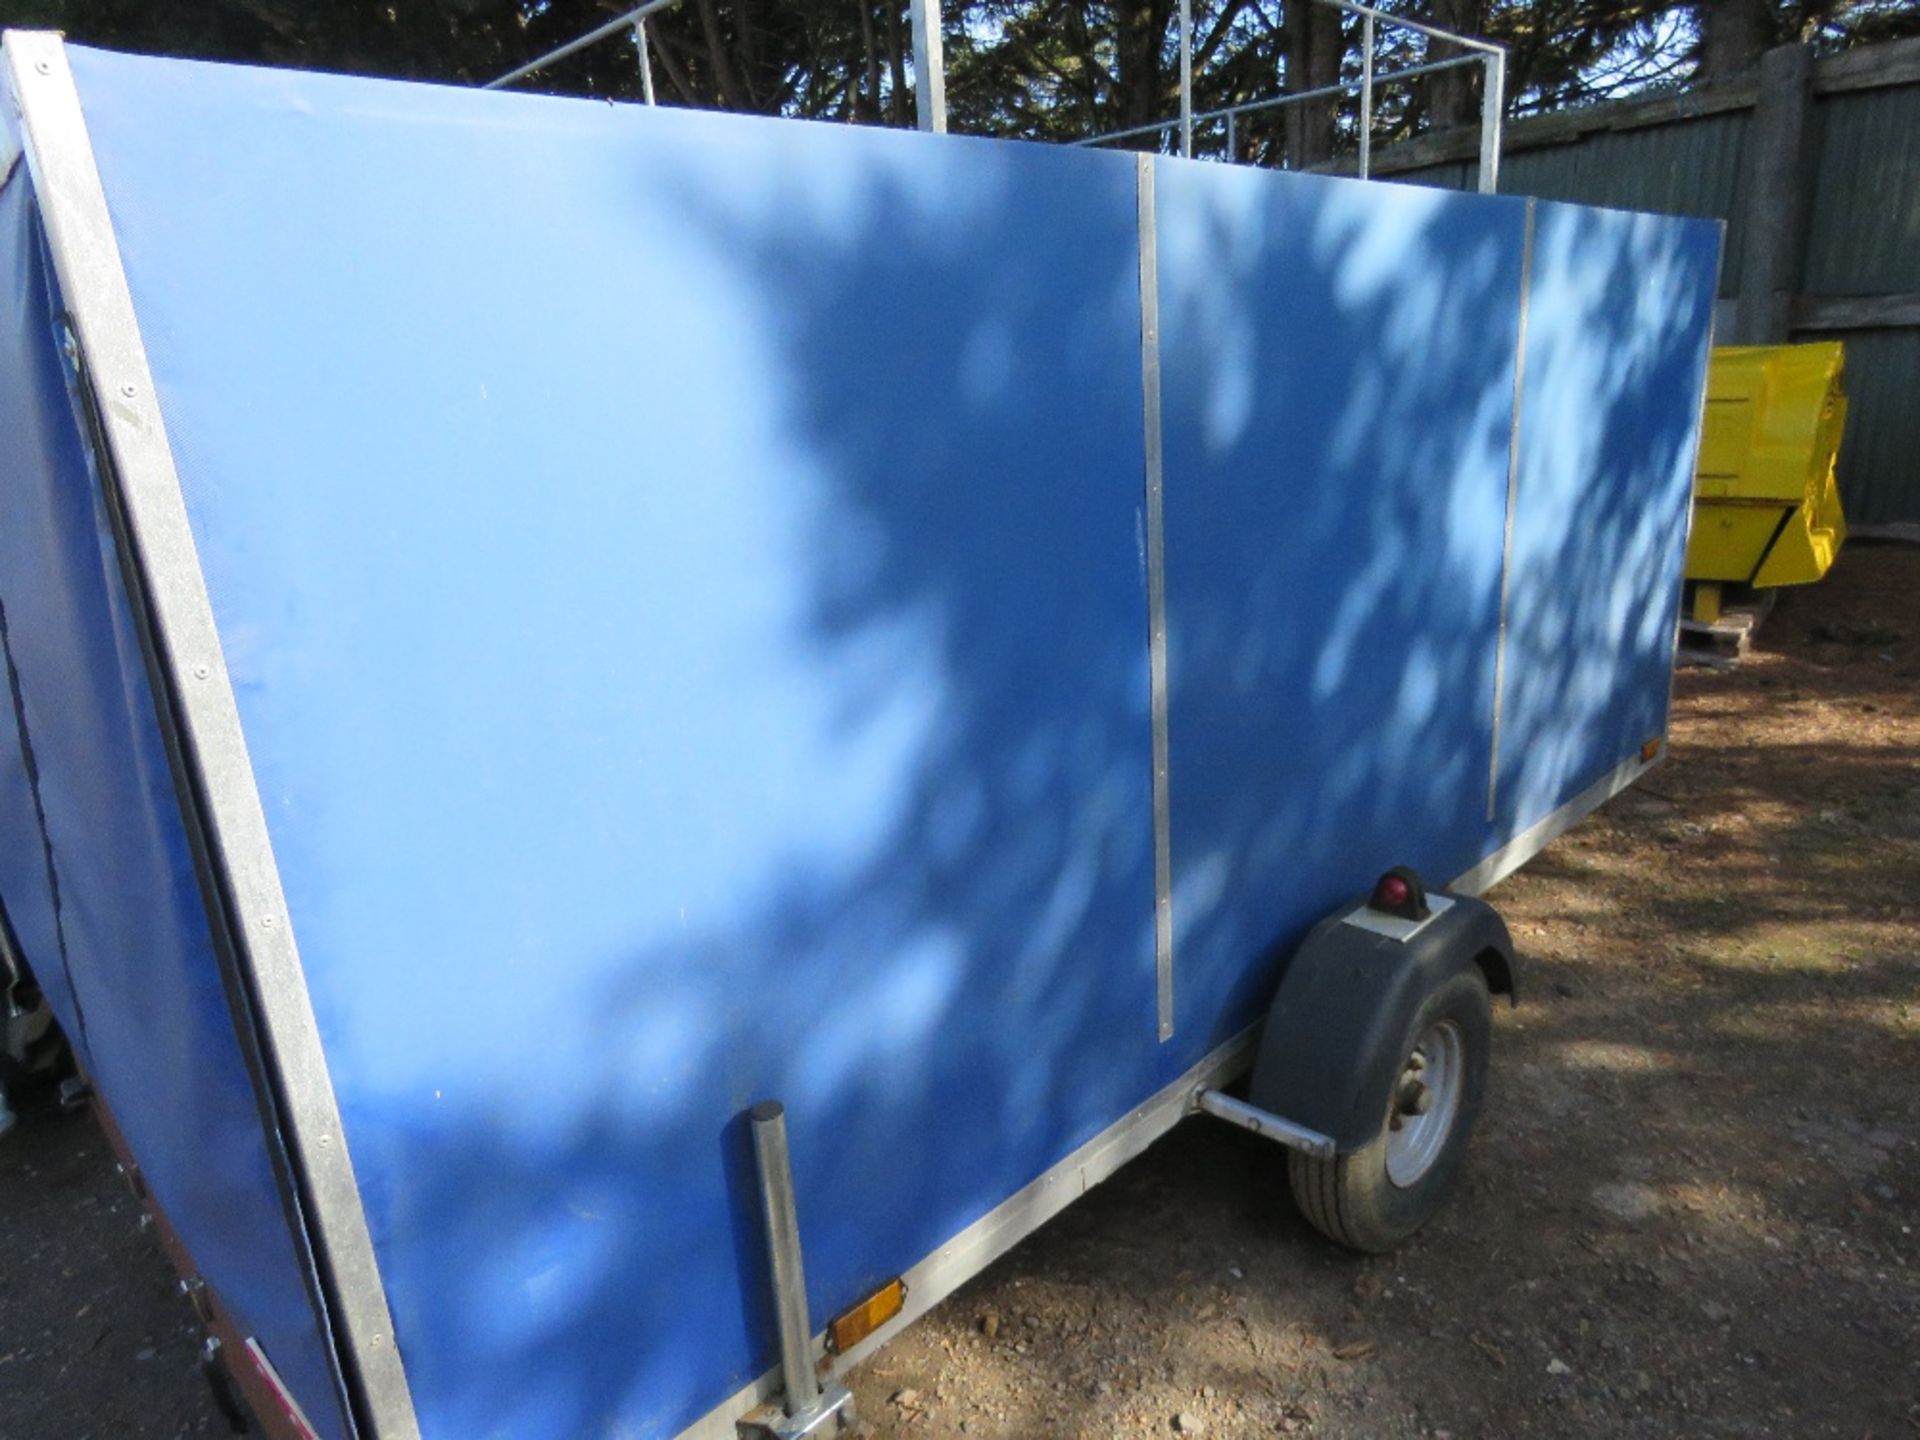 SINGLE AXLED TRAILER WITH SHEET COVER, 12FT X 5FT APPROX. POSSIBLY DESIGNED FOR CANOE TRANSPORT??